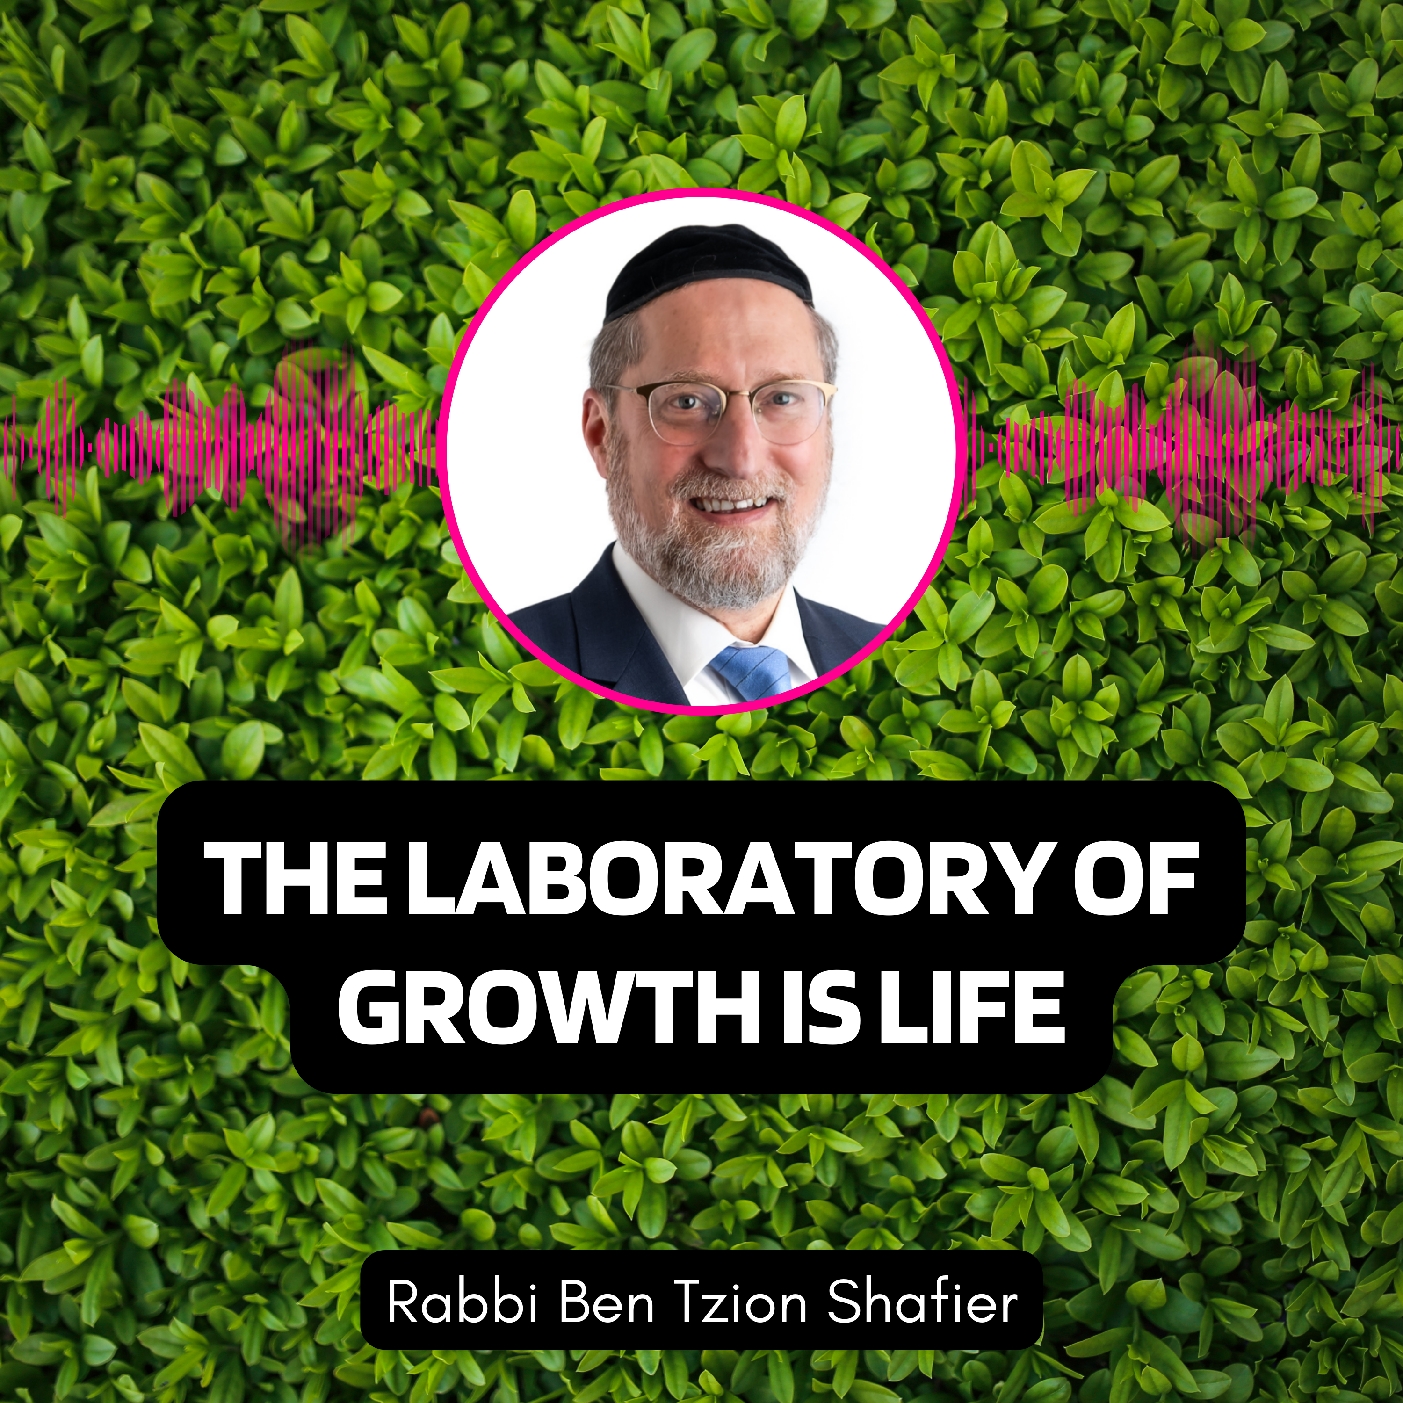 The Laboratory of Growth is Life